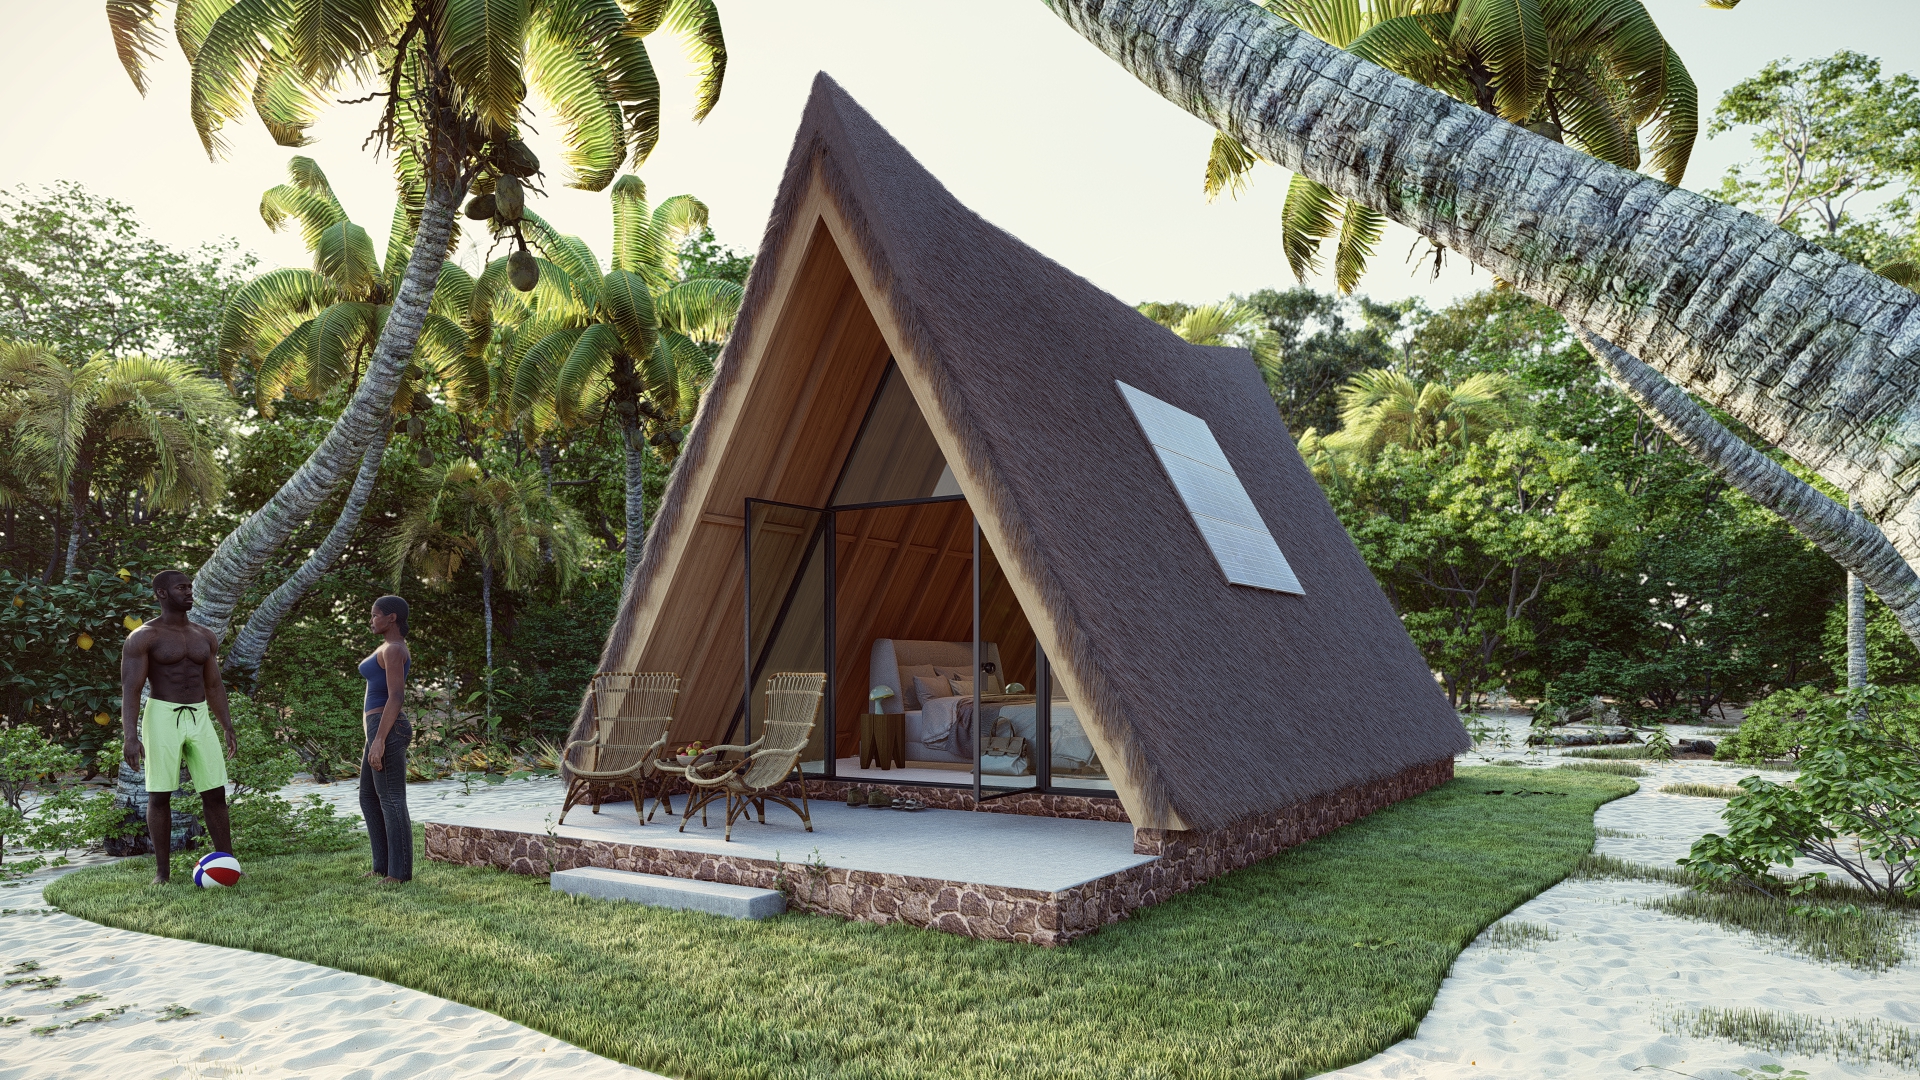 Aframe Home Design using Thatched Roof